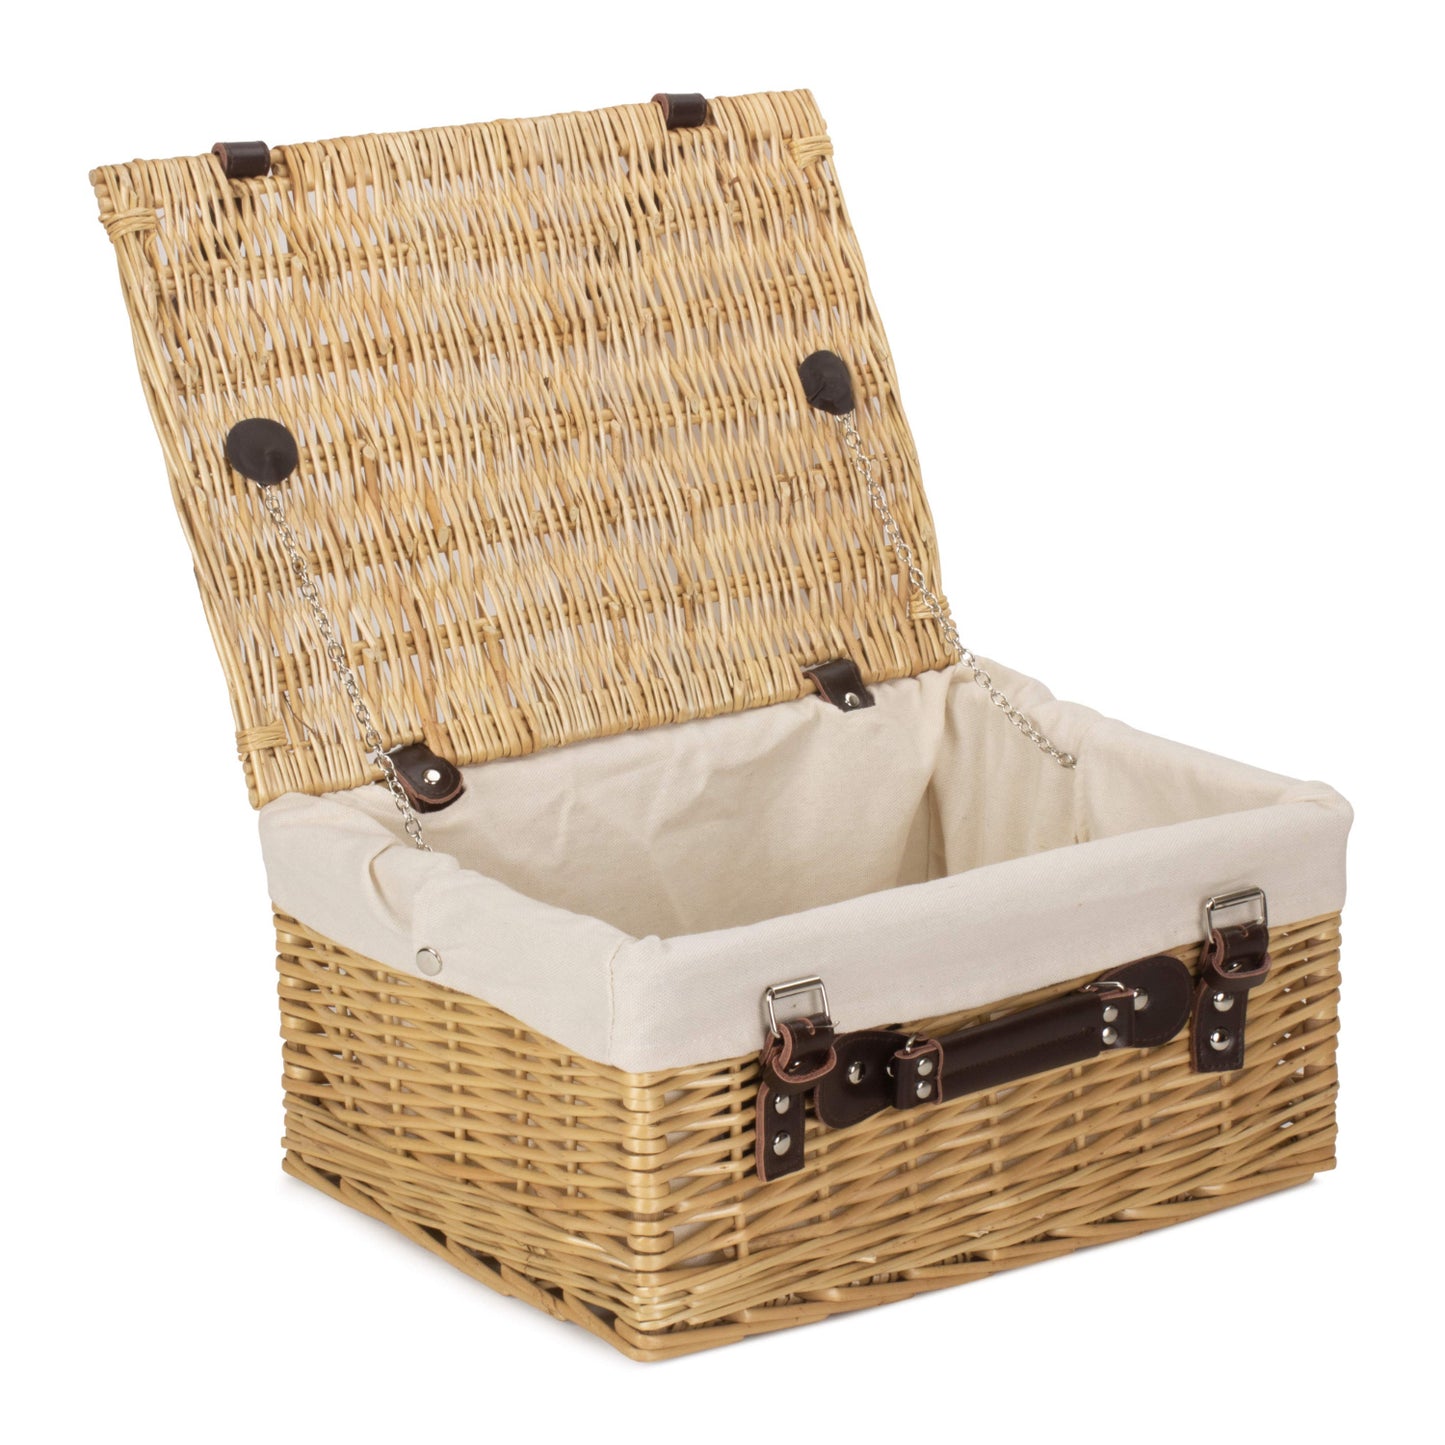 16 Inch Buff Hamper With White Lining